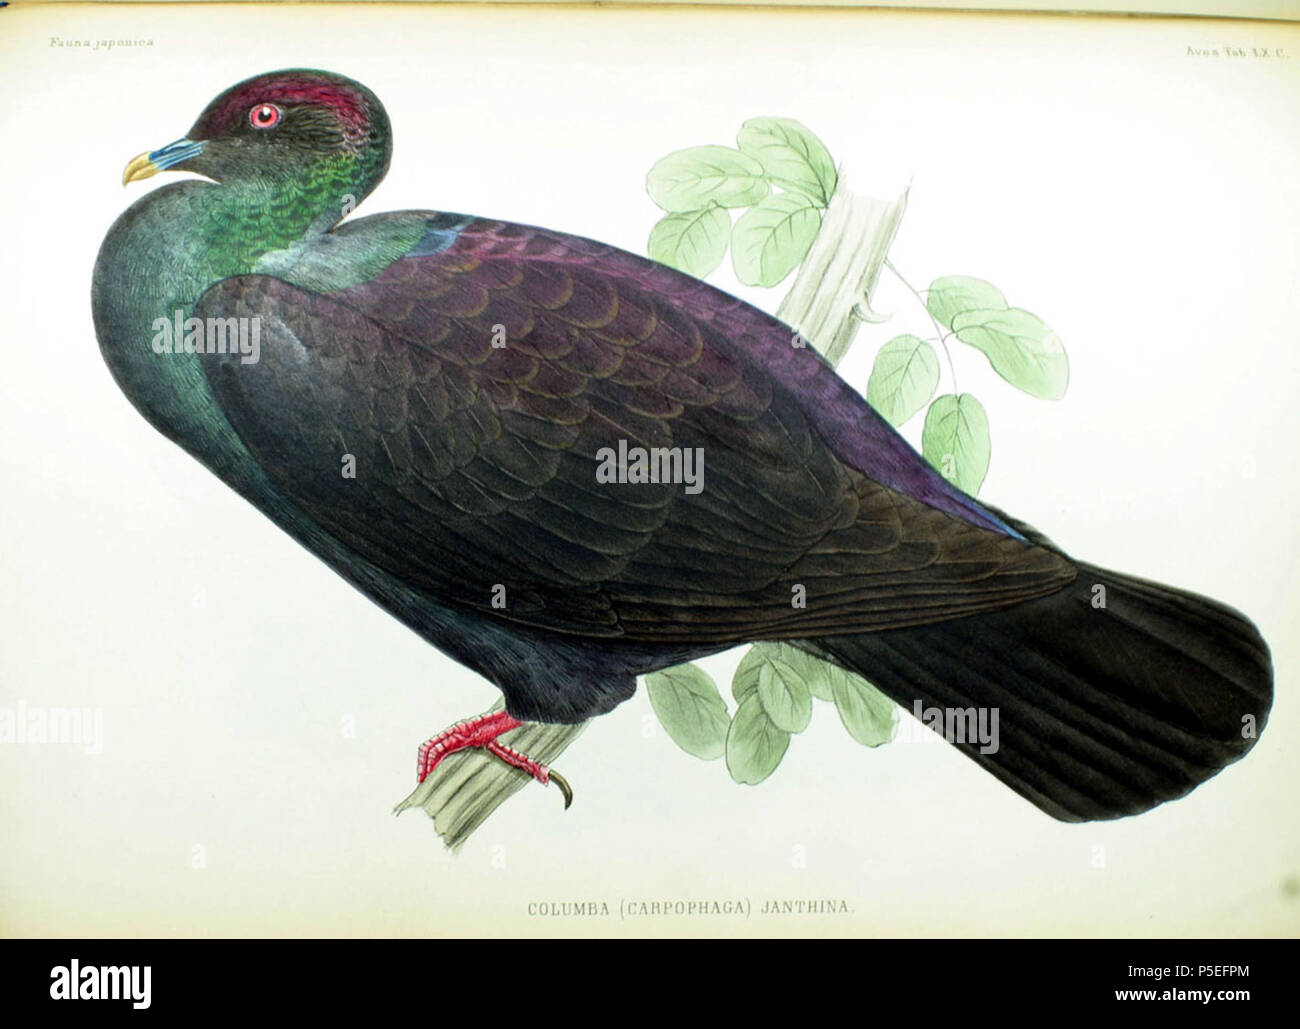 N/A. English: An illustration of a Japanese Wood Pigeon (Columba (Carpophaga) janthina) from Fauna Japonica . 1842.   Philipp Franz von Siebold  (1796–1866)      Alternative names Siebold; Philipp Franz Balthasar von Siebold  Description German physician, naturalist and artist  Date of birth/death 17 February 1796 18 October 1866  Location of birth/death Würzburg Würzburg  Work location Leiden  Authority control  : Q77140 VIAF:17320528 ISNI:0000 0001 0875 0584 ULAN:500325999 LCCN:n50058839 NLA:35498475 WorldCat 371 Columba (Carpophaga) janthina Fauna Japonica Stock Photo